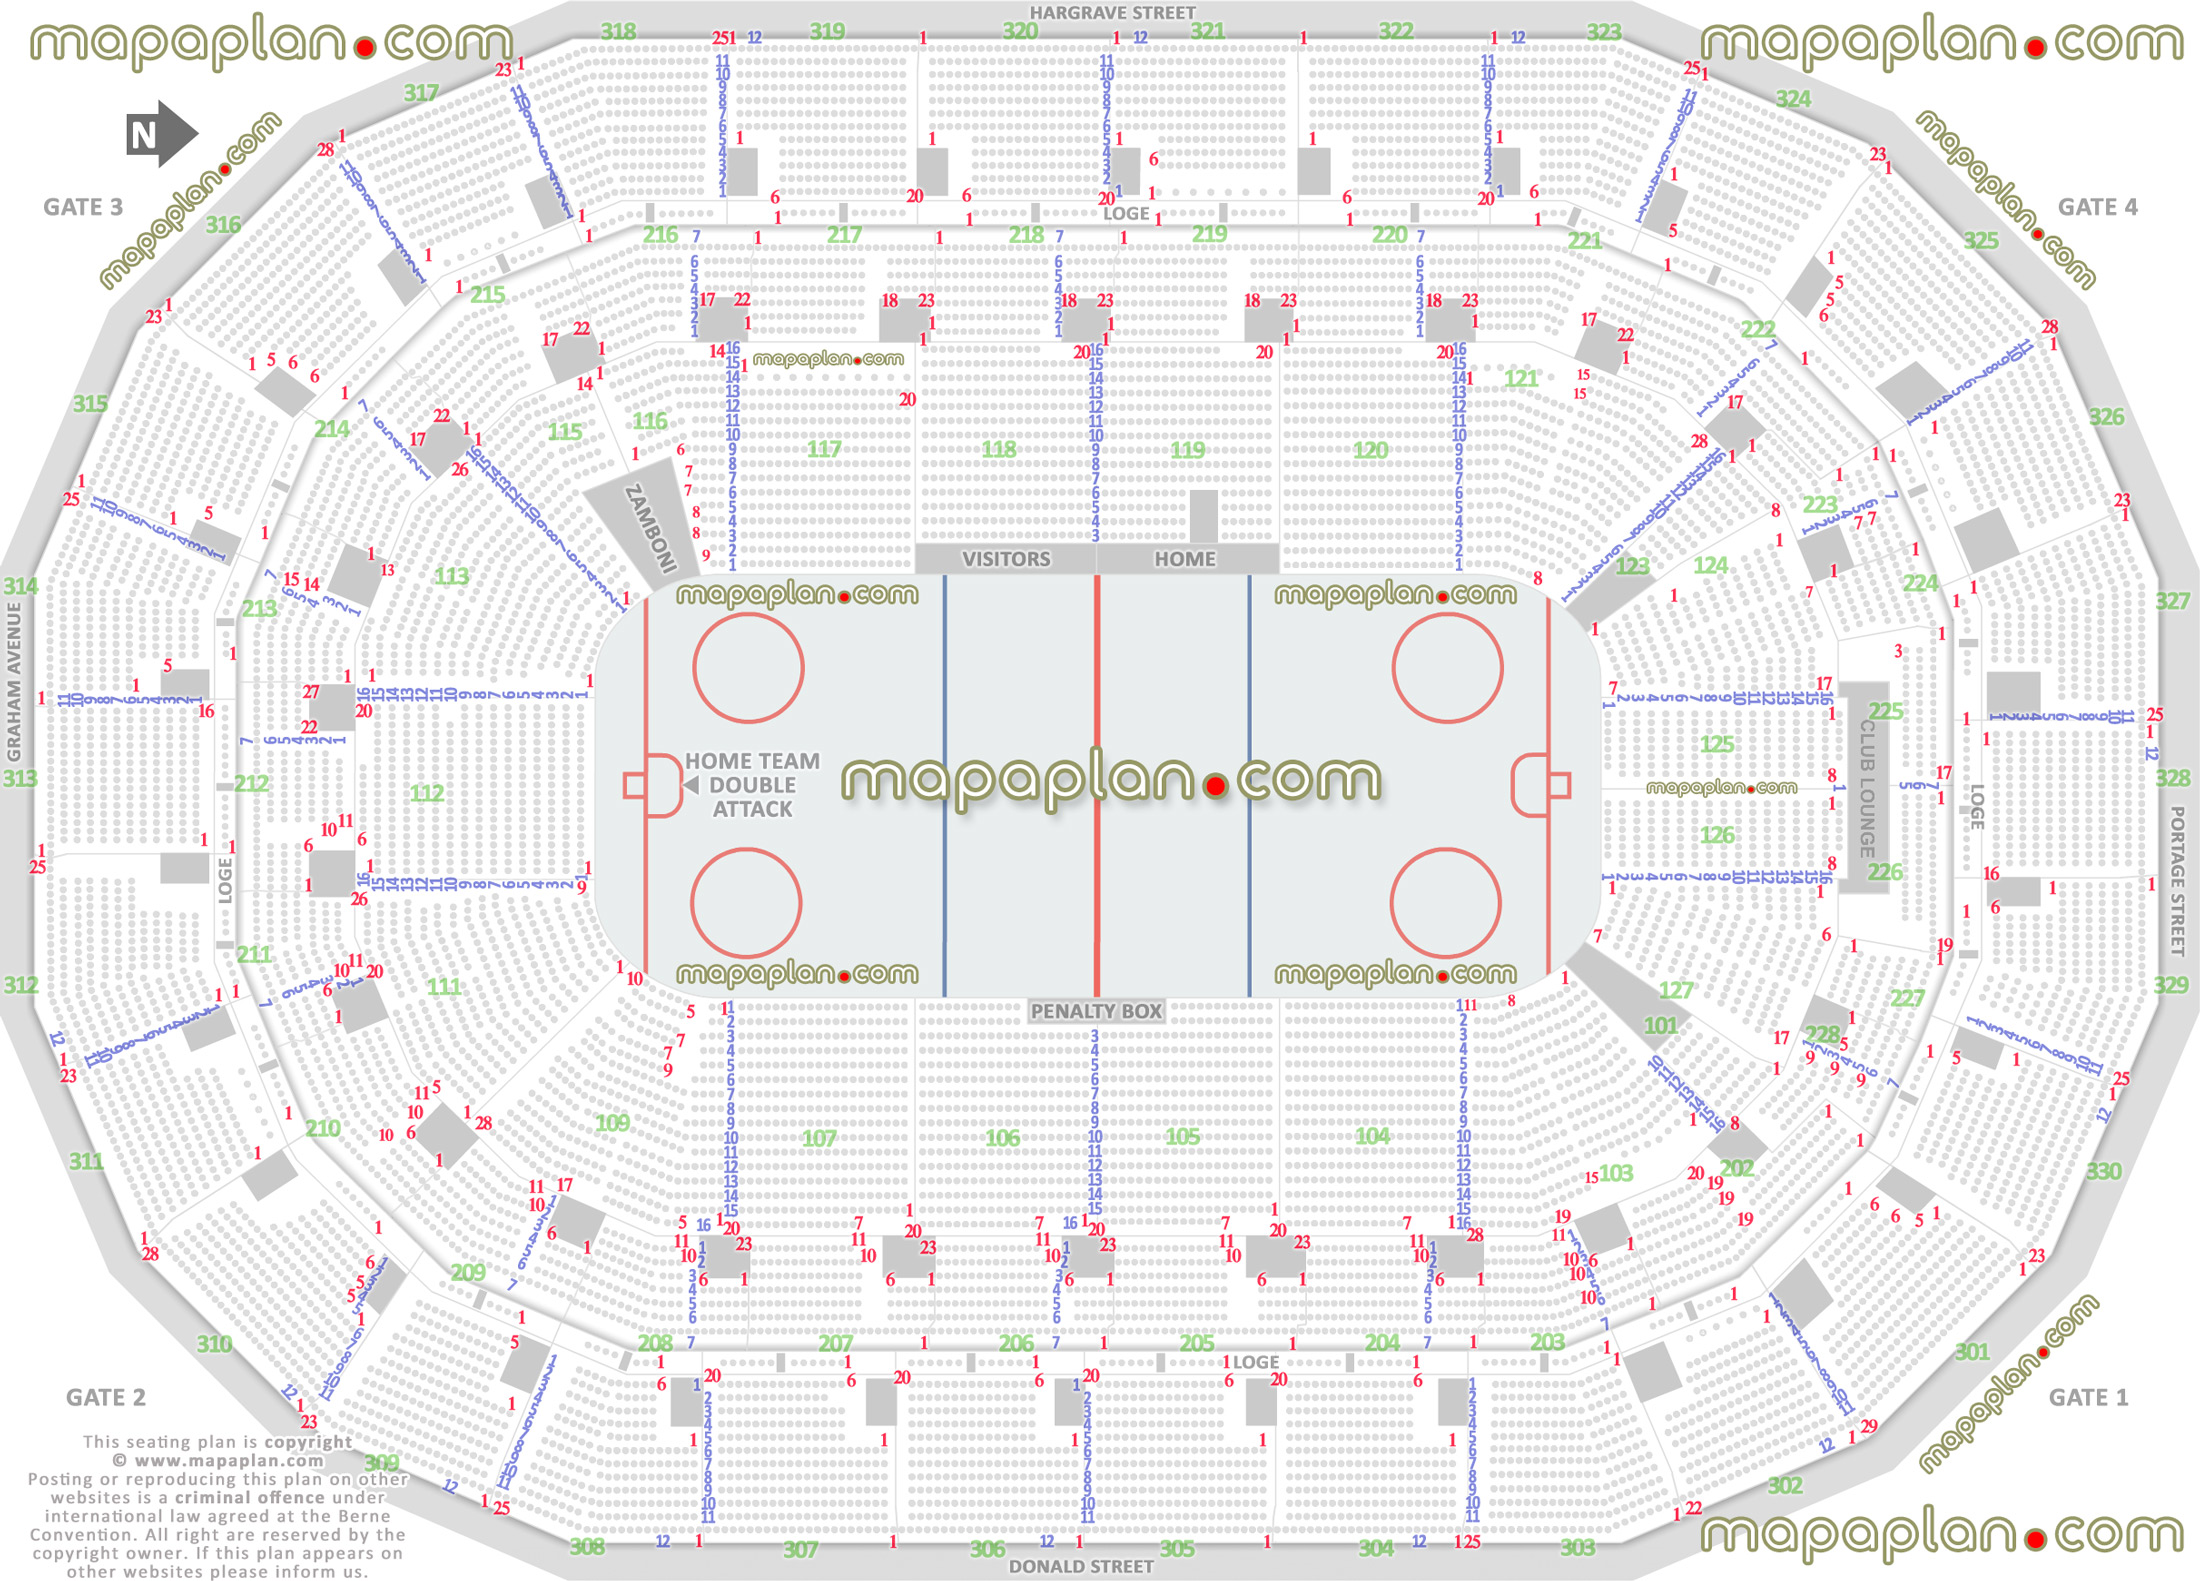 hockey plan winnipeg jets nhl manitoba moose games arena stadium diagram individual find my seat locator how many seats row how seats rows numbered glass sections 101 103 104 105 106 107 109 111 112 113 115 116 117 118 119 120 121 123 124 125 126 127 Winnipeg Canada Life Centre seating chart